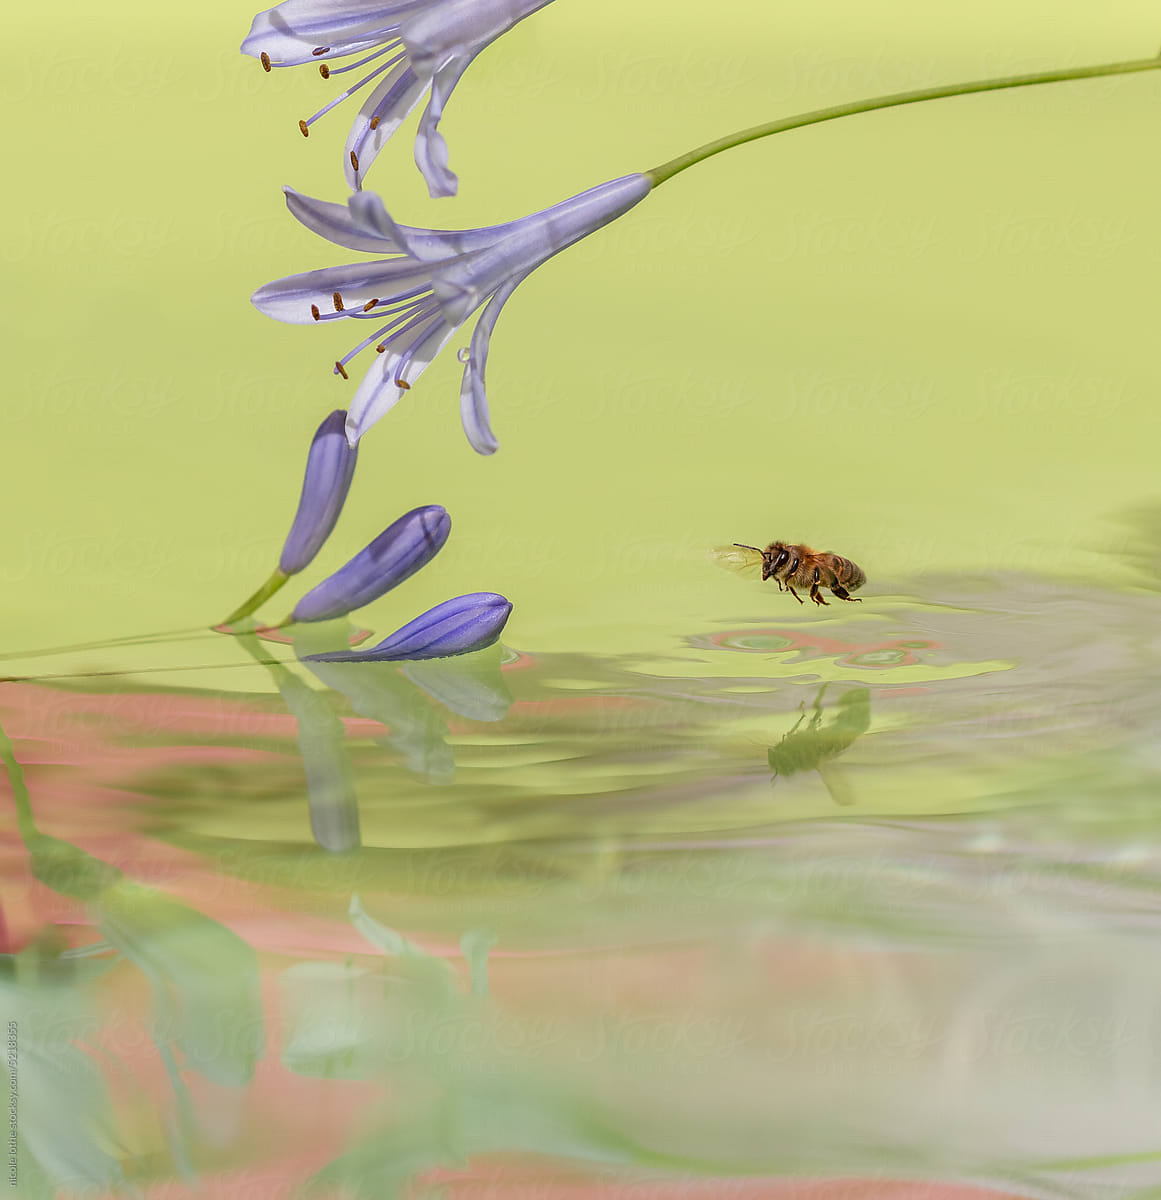 Bee flying very low over water.